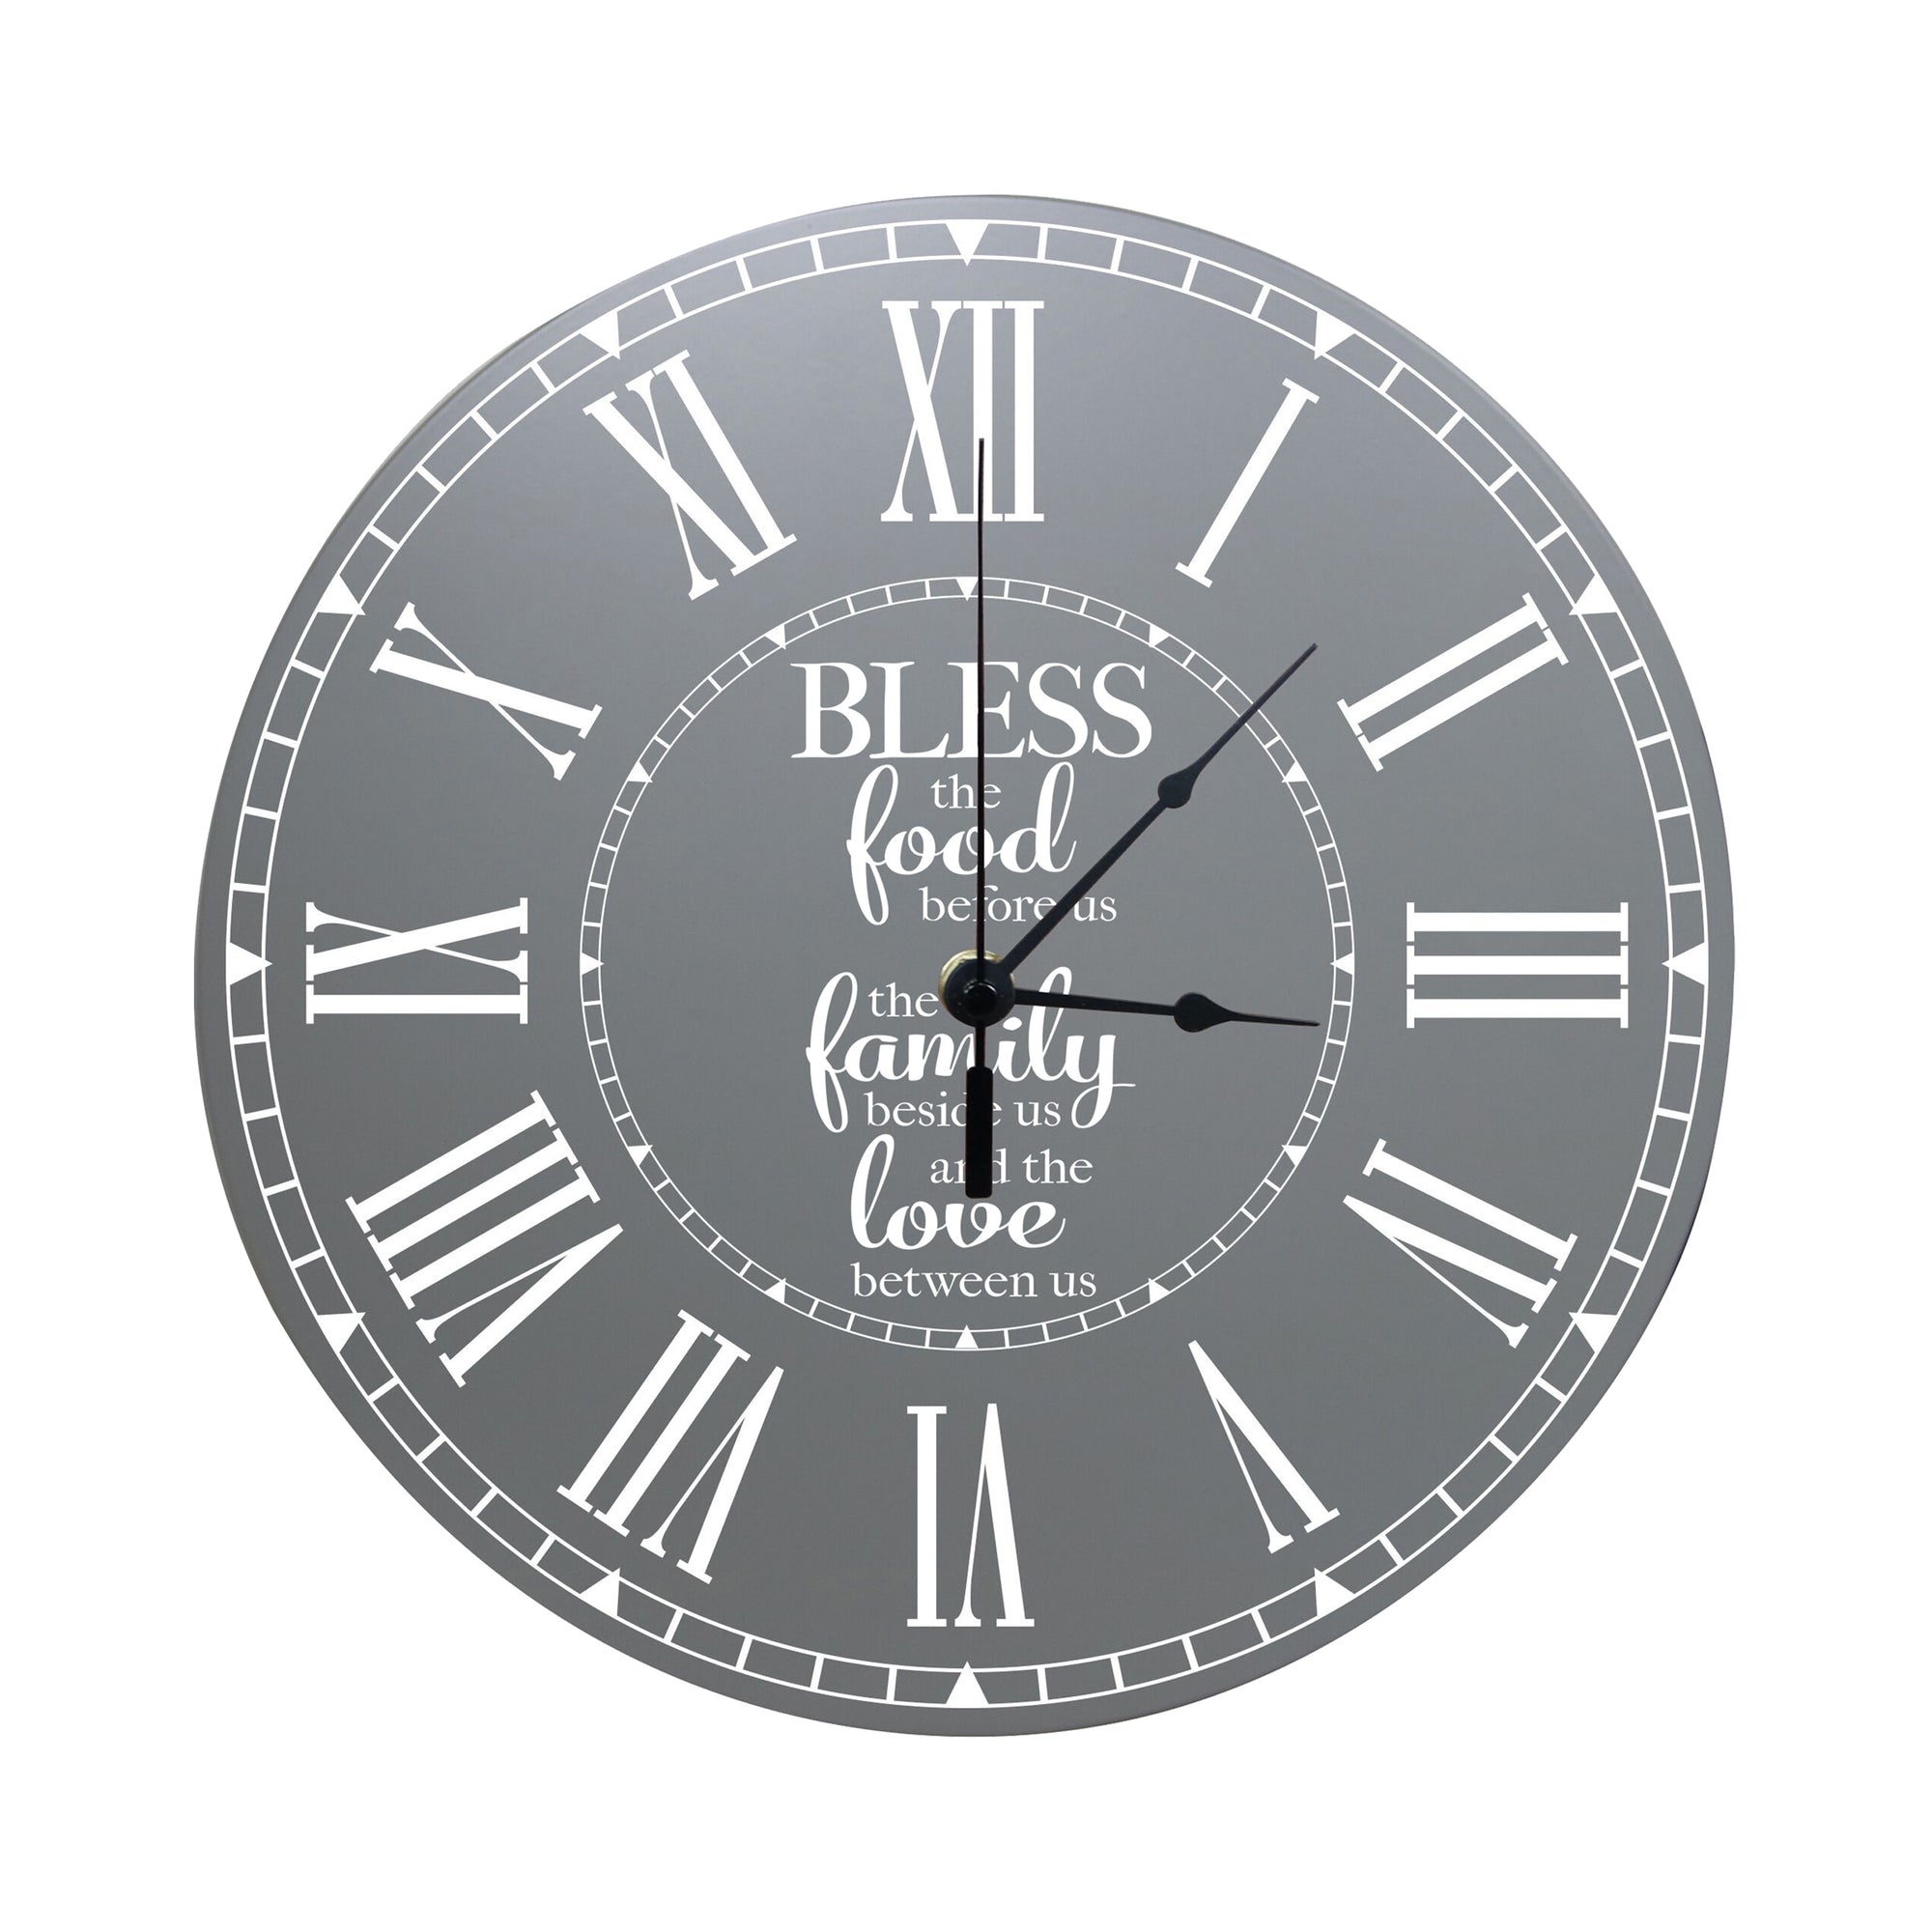 LifeSong Milestones Family Wall or Desktop Clock - Bless The Food - Housewarming, Wedding Clock Gift For Couples 12 Inch Diameter Accurate Quartz Movement with Roman Numerals